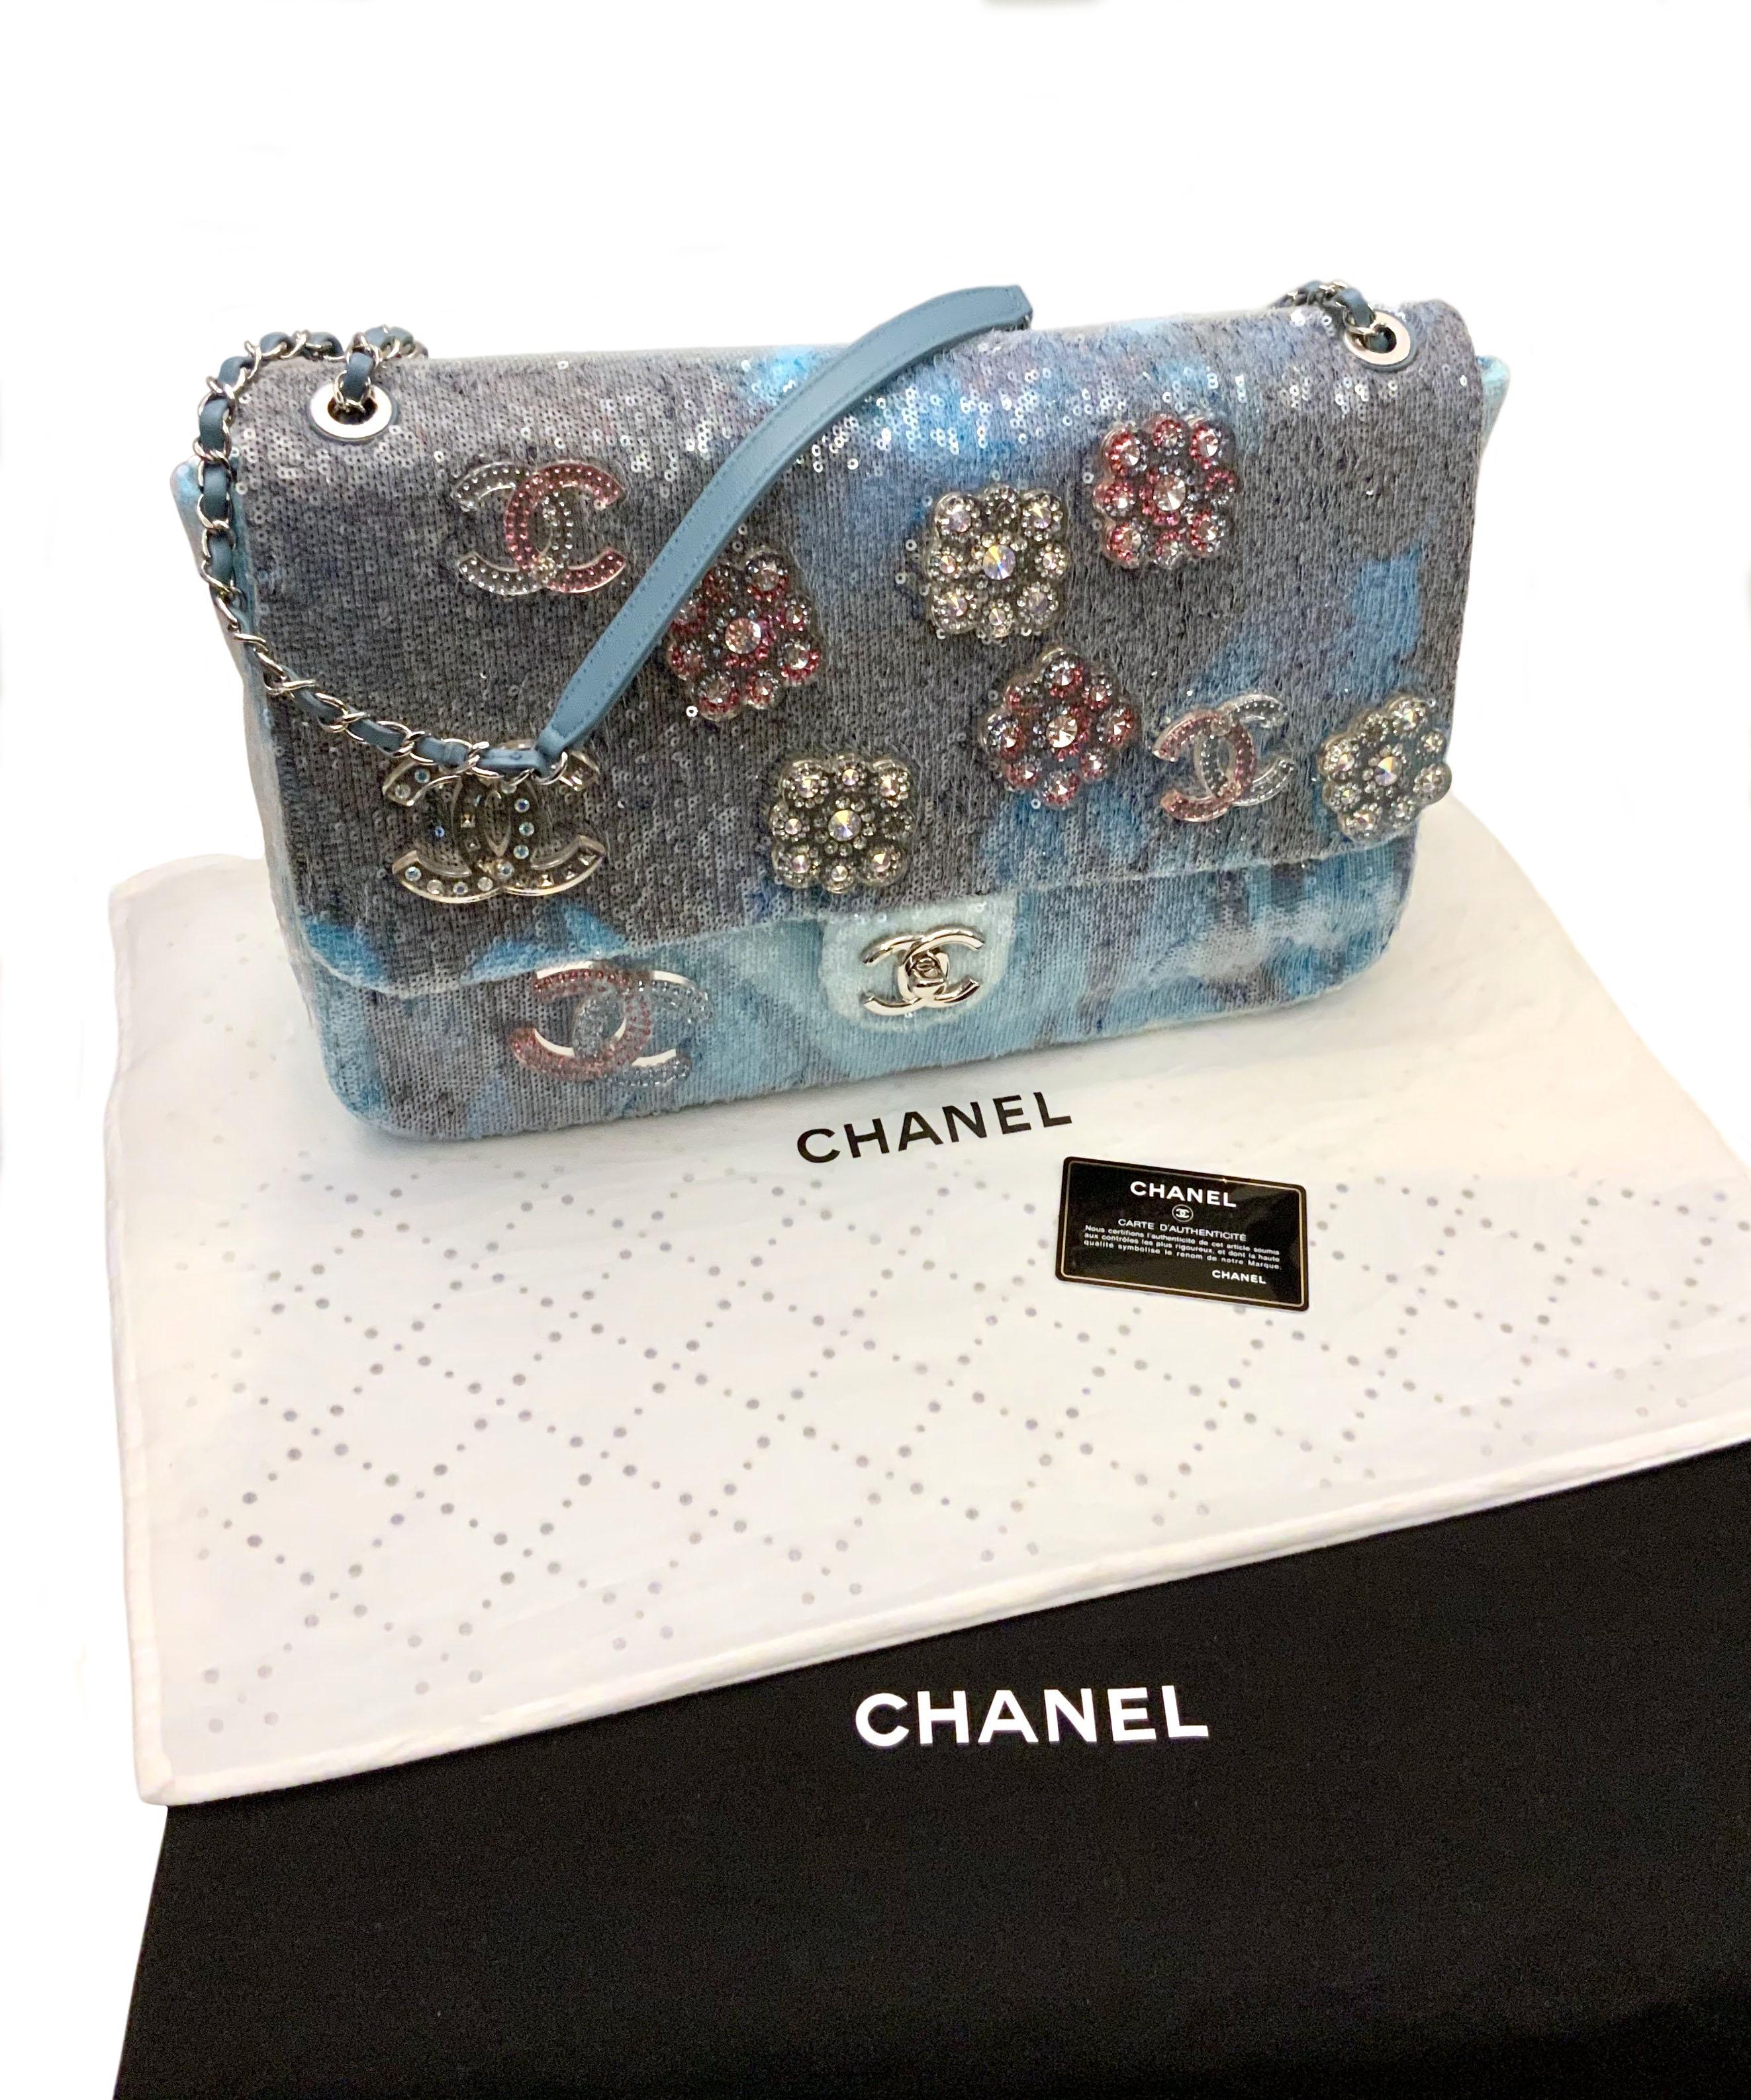 This new pre-owned stunning Limited Edition large flap bag from the house of Chanel is realized in smooth calfskin leather with clear sequin embellishments throughout exterior.
It features the CC turn-lock logo in silver-tone and some resin camelia